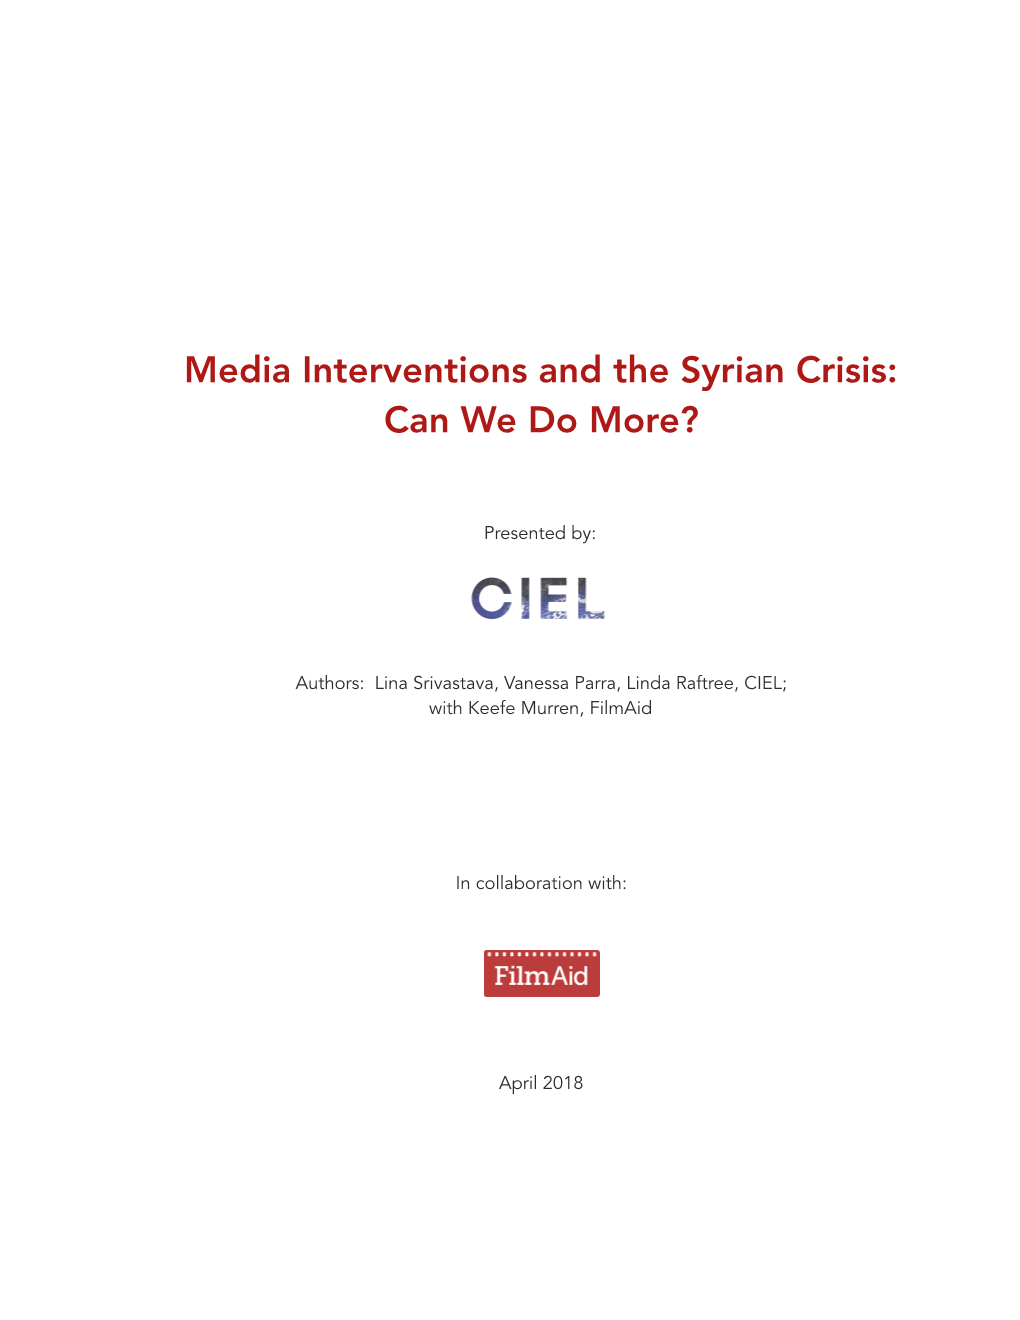 Media Interventions and the Syrian Crisis: Can We Do More?